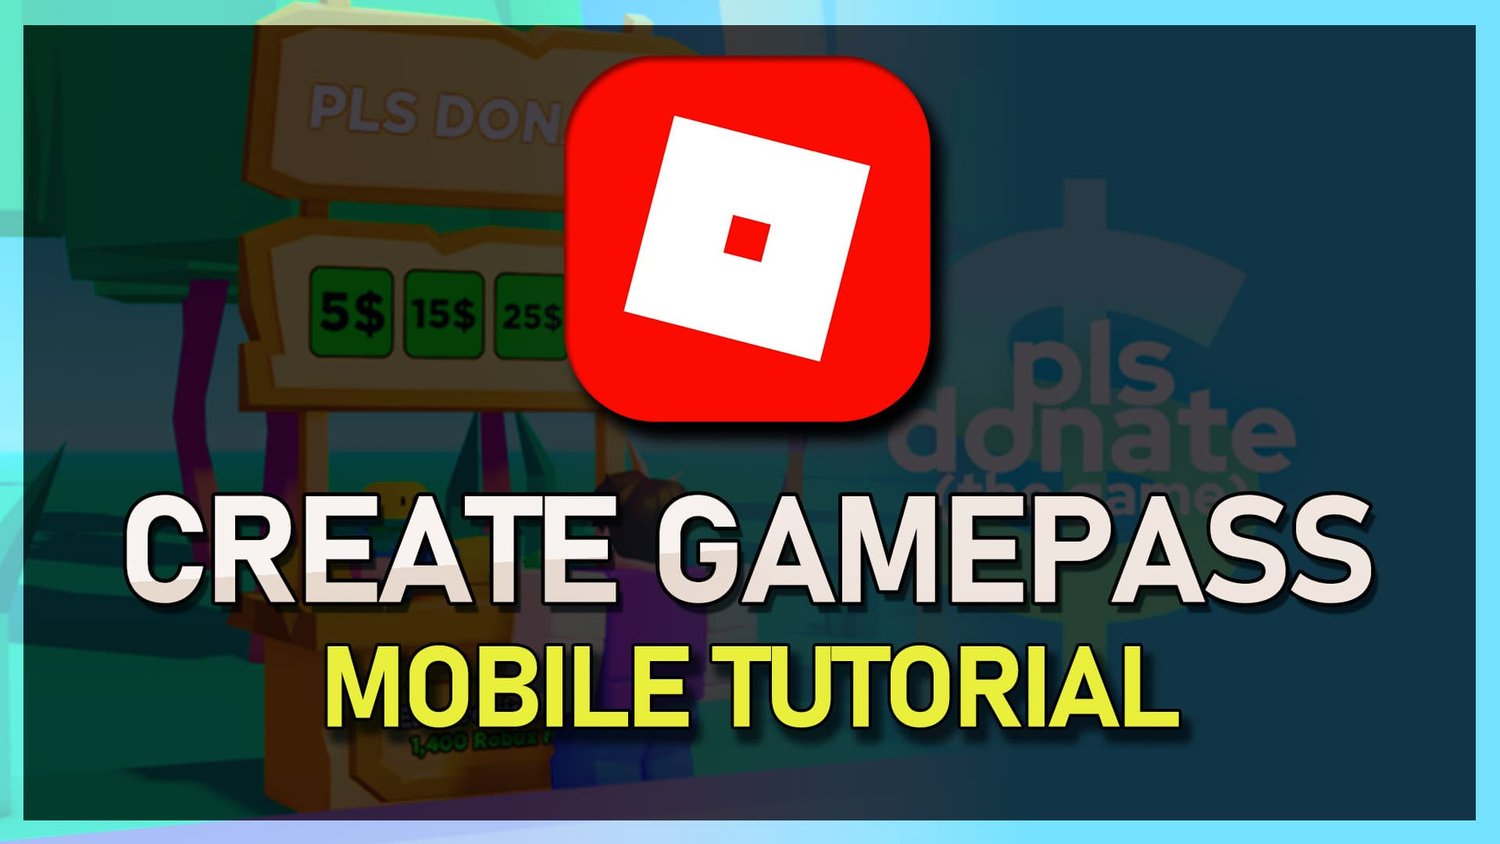 How To Make A Gamepass in Roblox Pls Donate - iOS and Android — Tech How